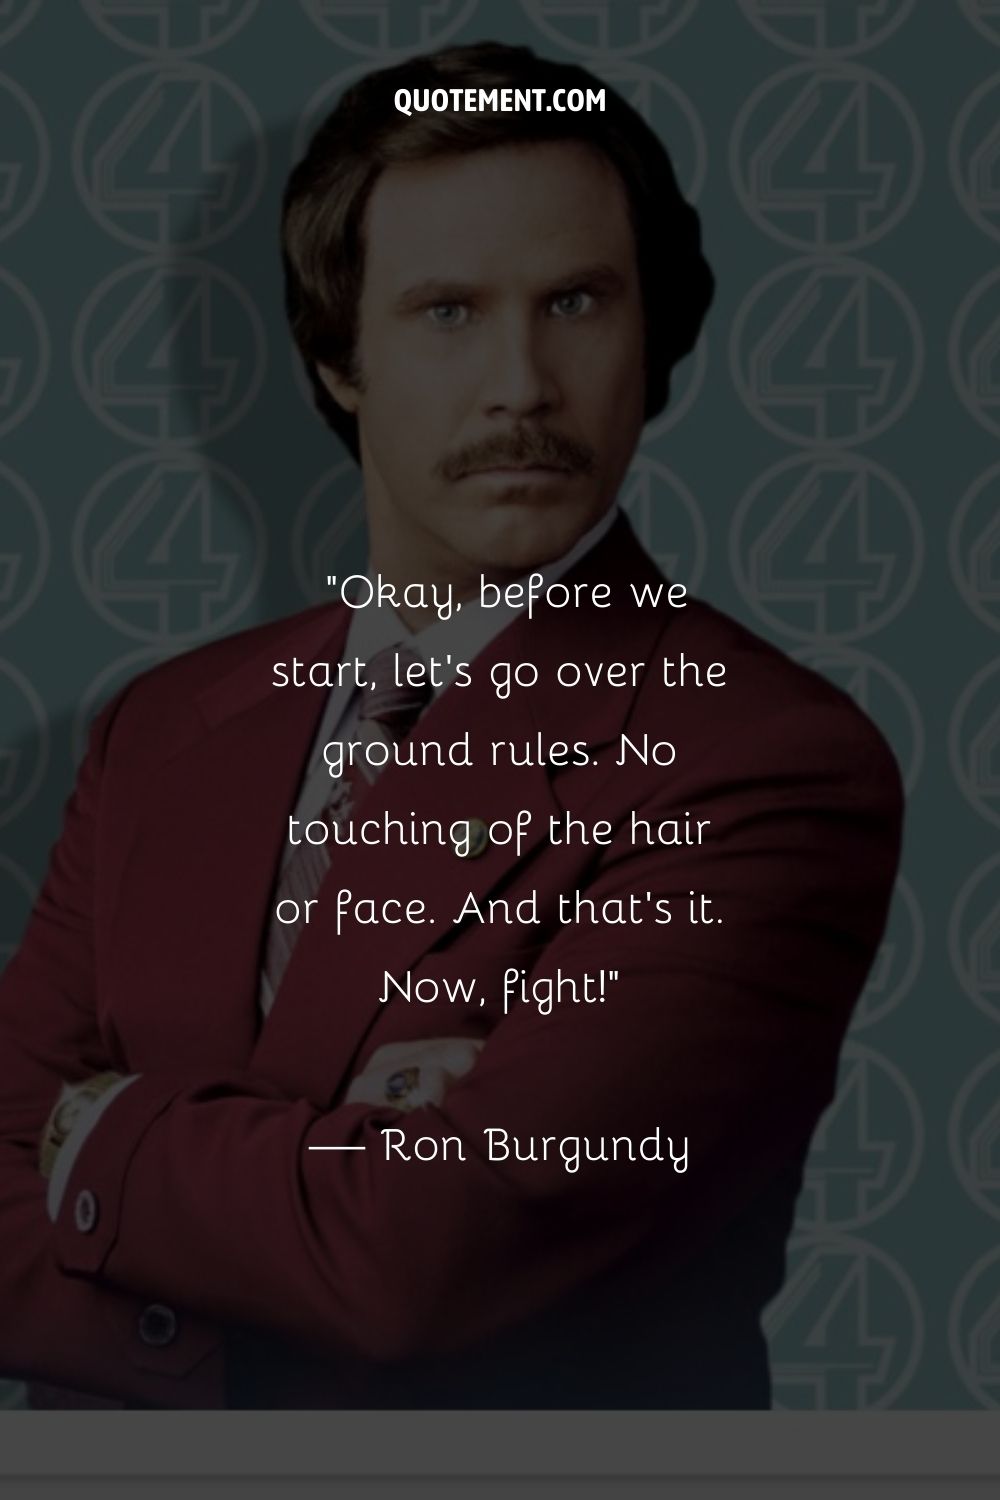 Famous Ron Burgundy quote from Anchorman.